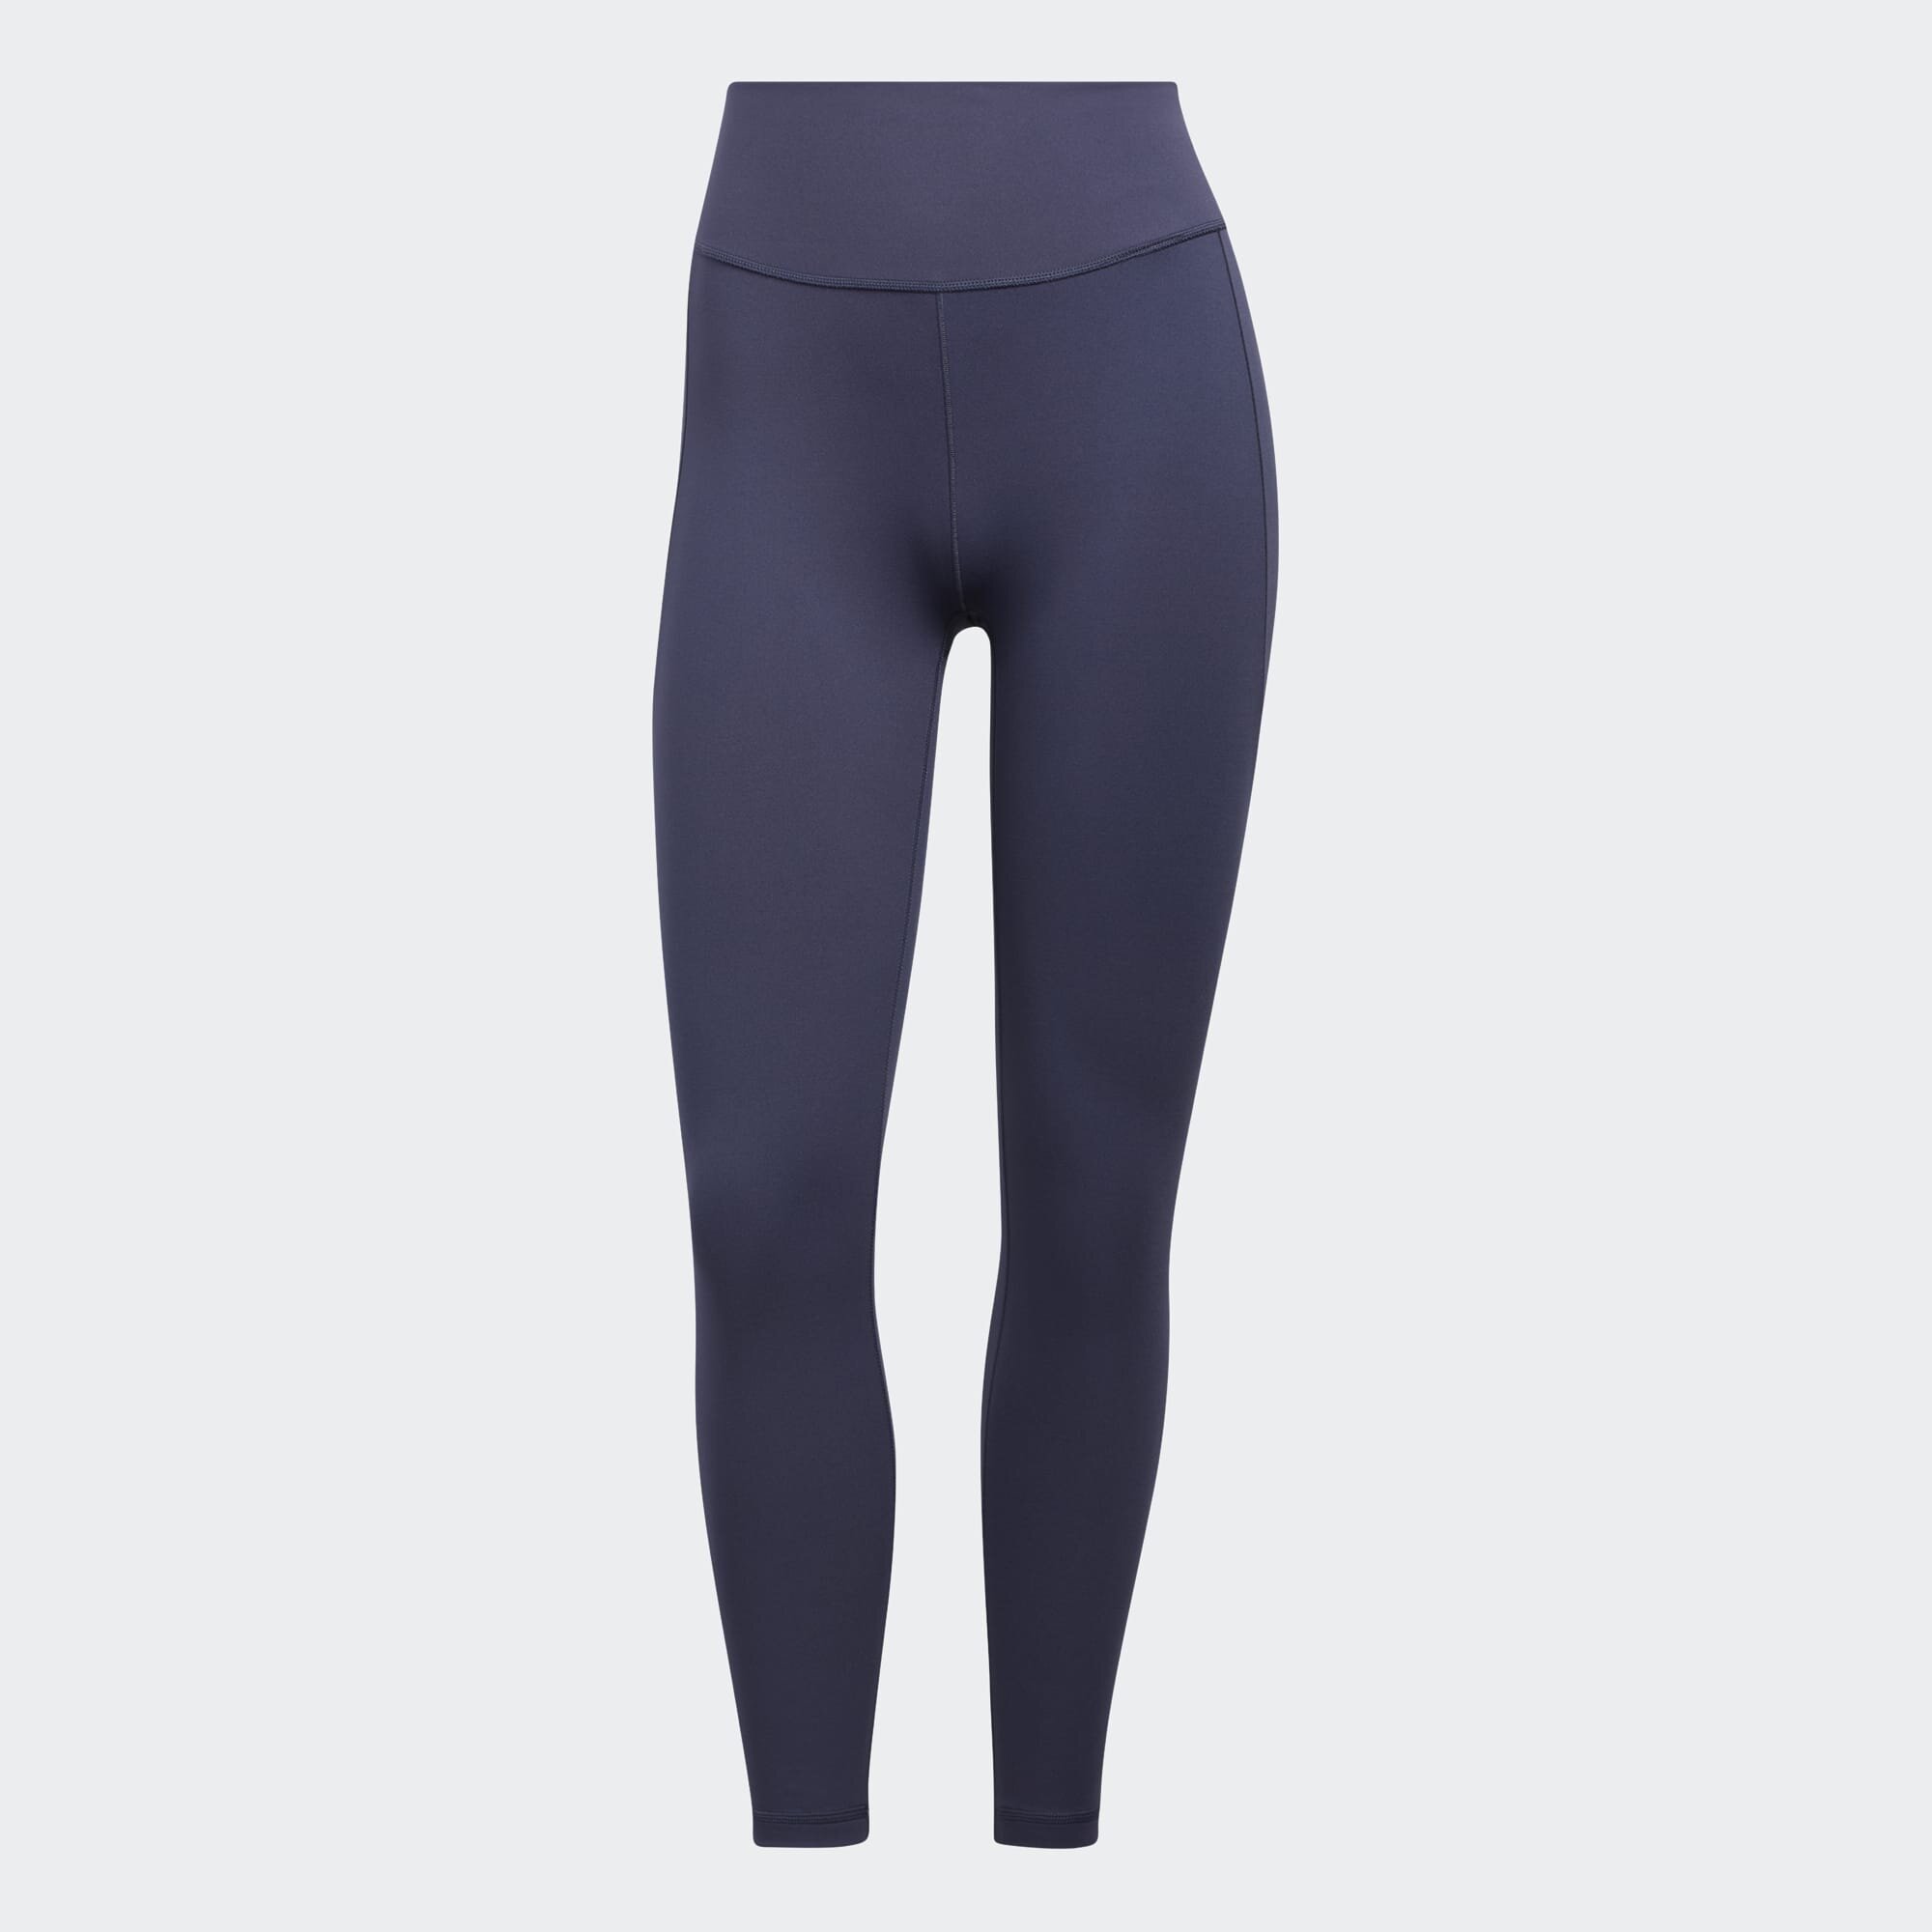 Adidas Yoga Studio 7/8 Tight Womens - Buy Online - Ph: 1800-370-766 -  AfterPay & ZipPay Available!